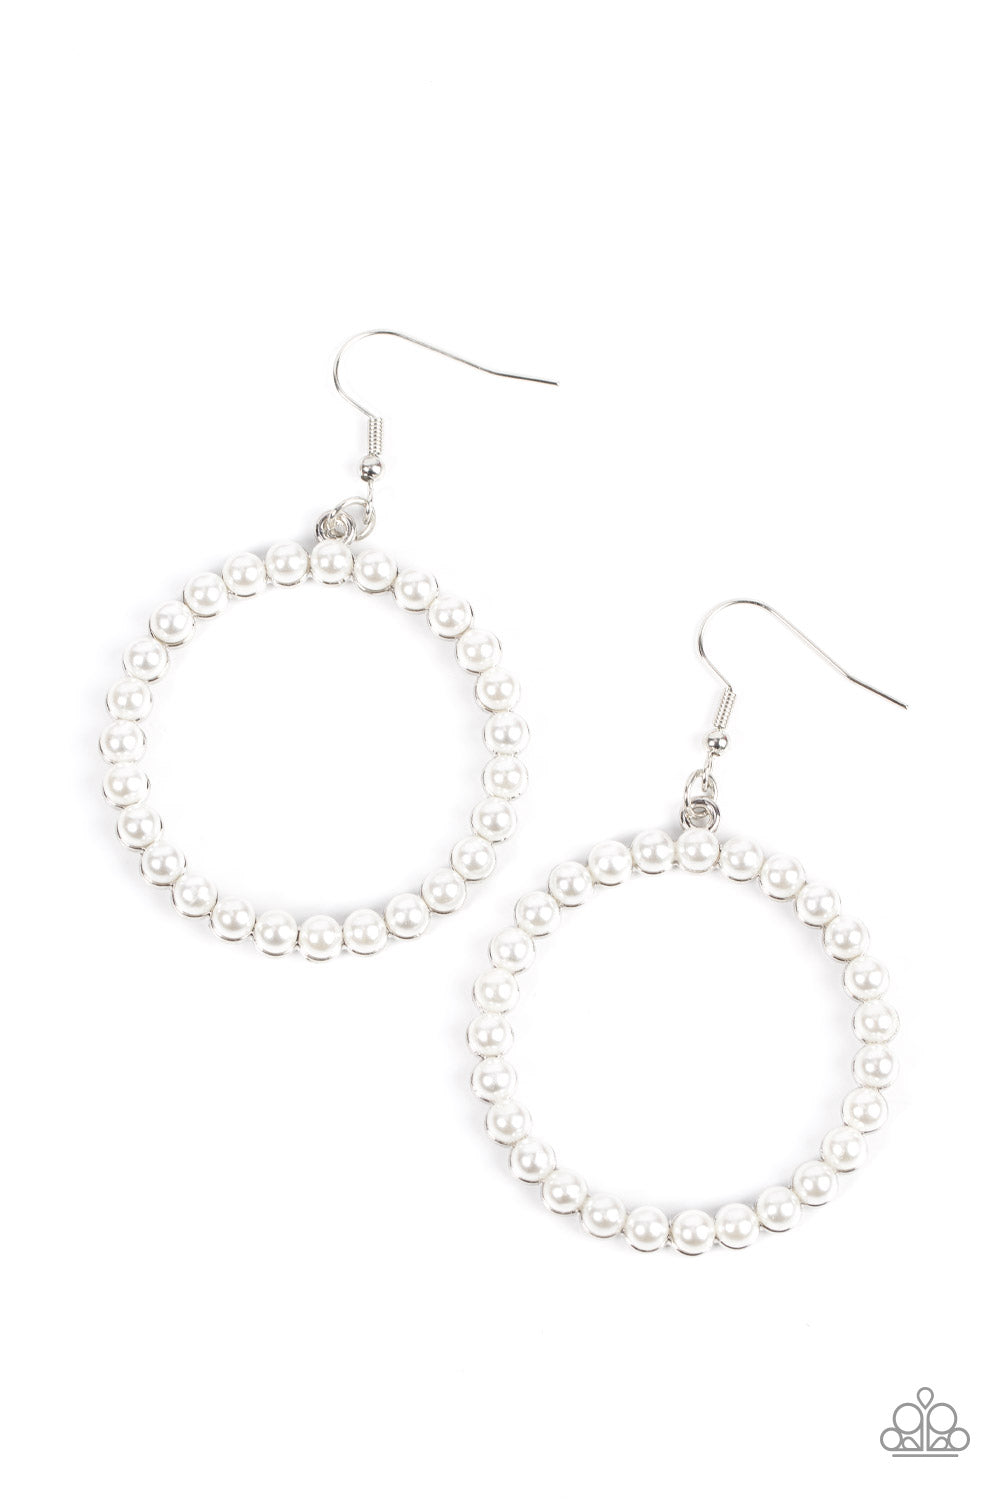 String Theory - White Earrings - Paparazzi Accessories – Five